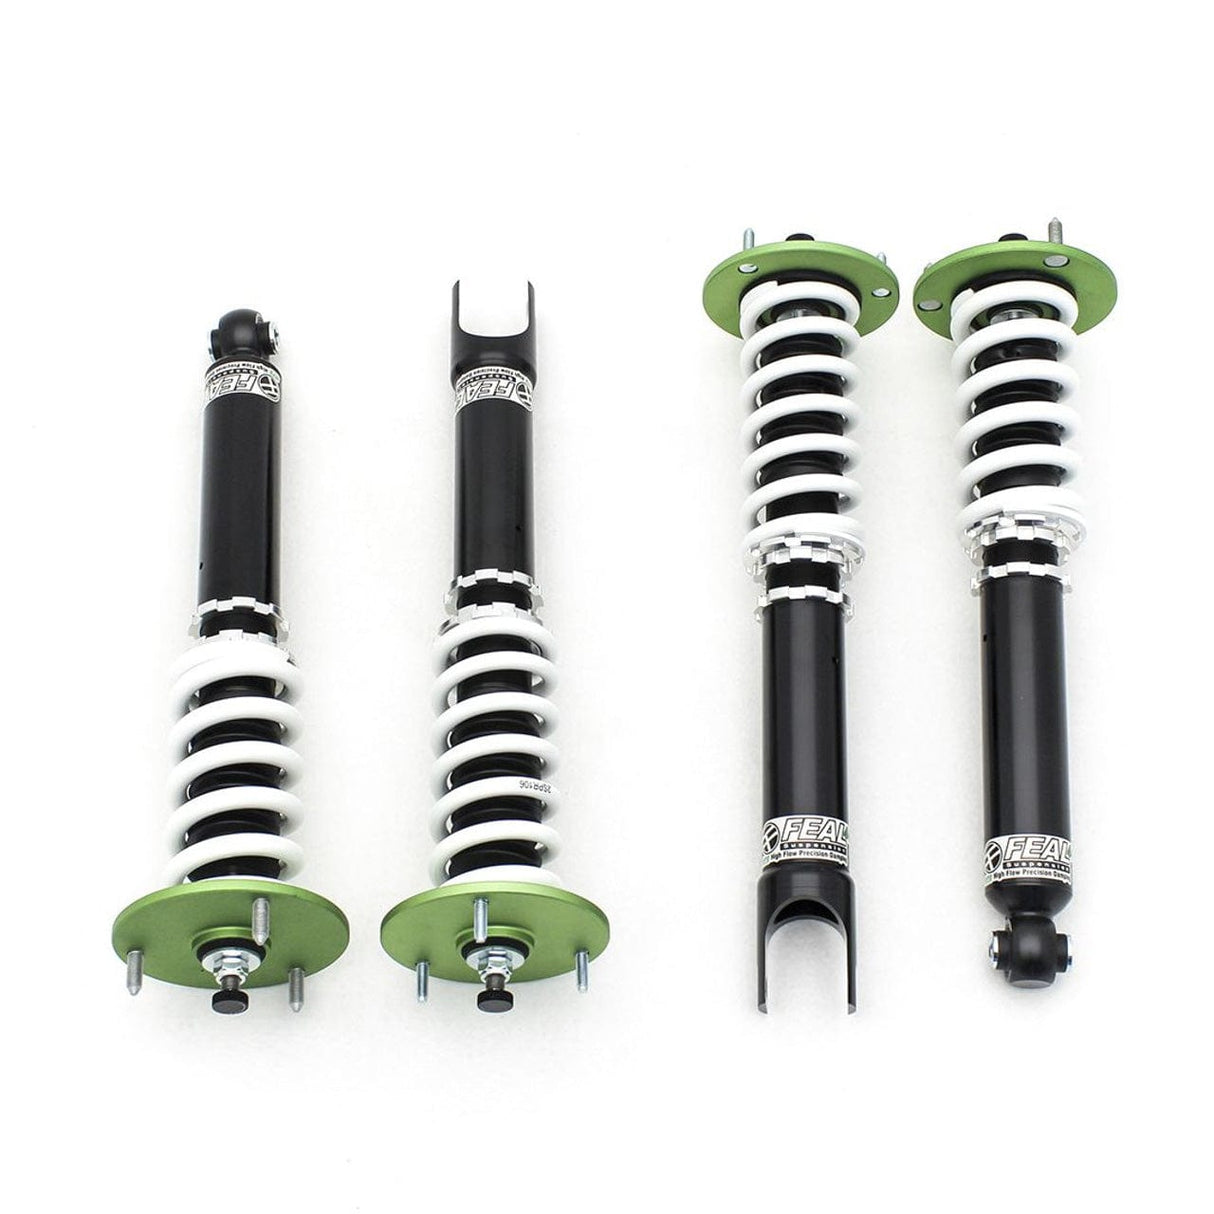 Feal 441 Coilovers - 1993-1995 Mazda RX-7 (FD)